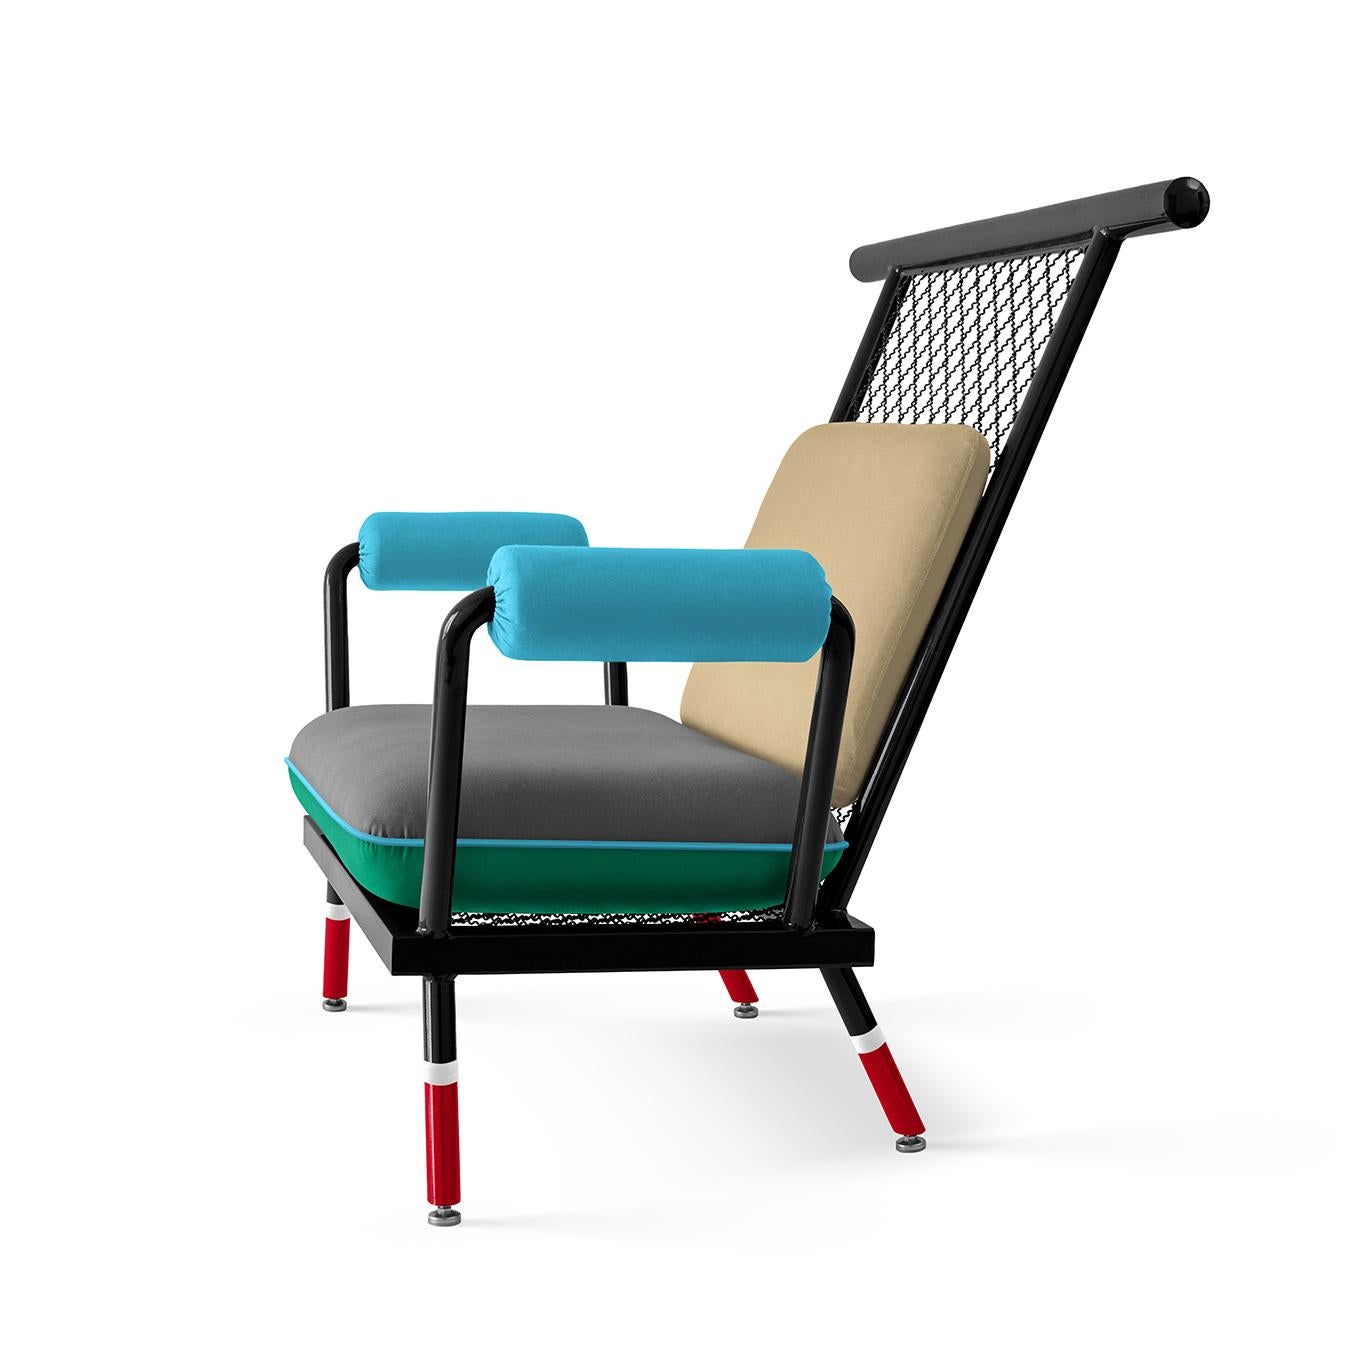 Honorable mention by European Product Design Award: Home Interior Products Category.

The main inspiration for PK6 chair comes from standard metal structures used for secondary architectural projects.
This project transforms industrial profiles